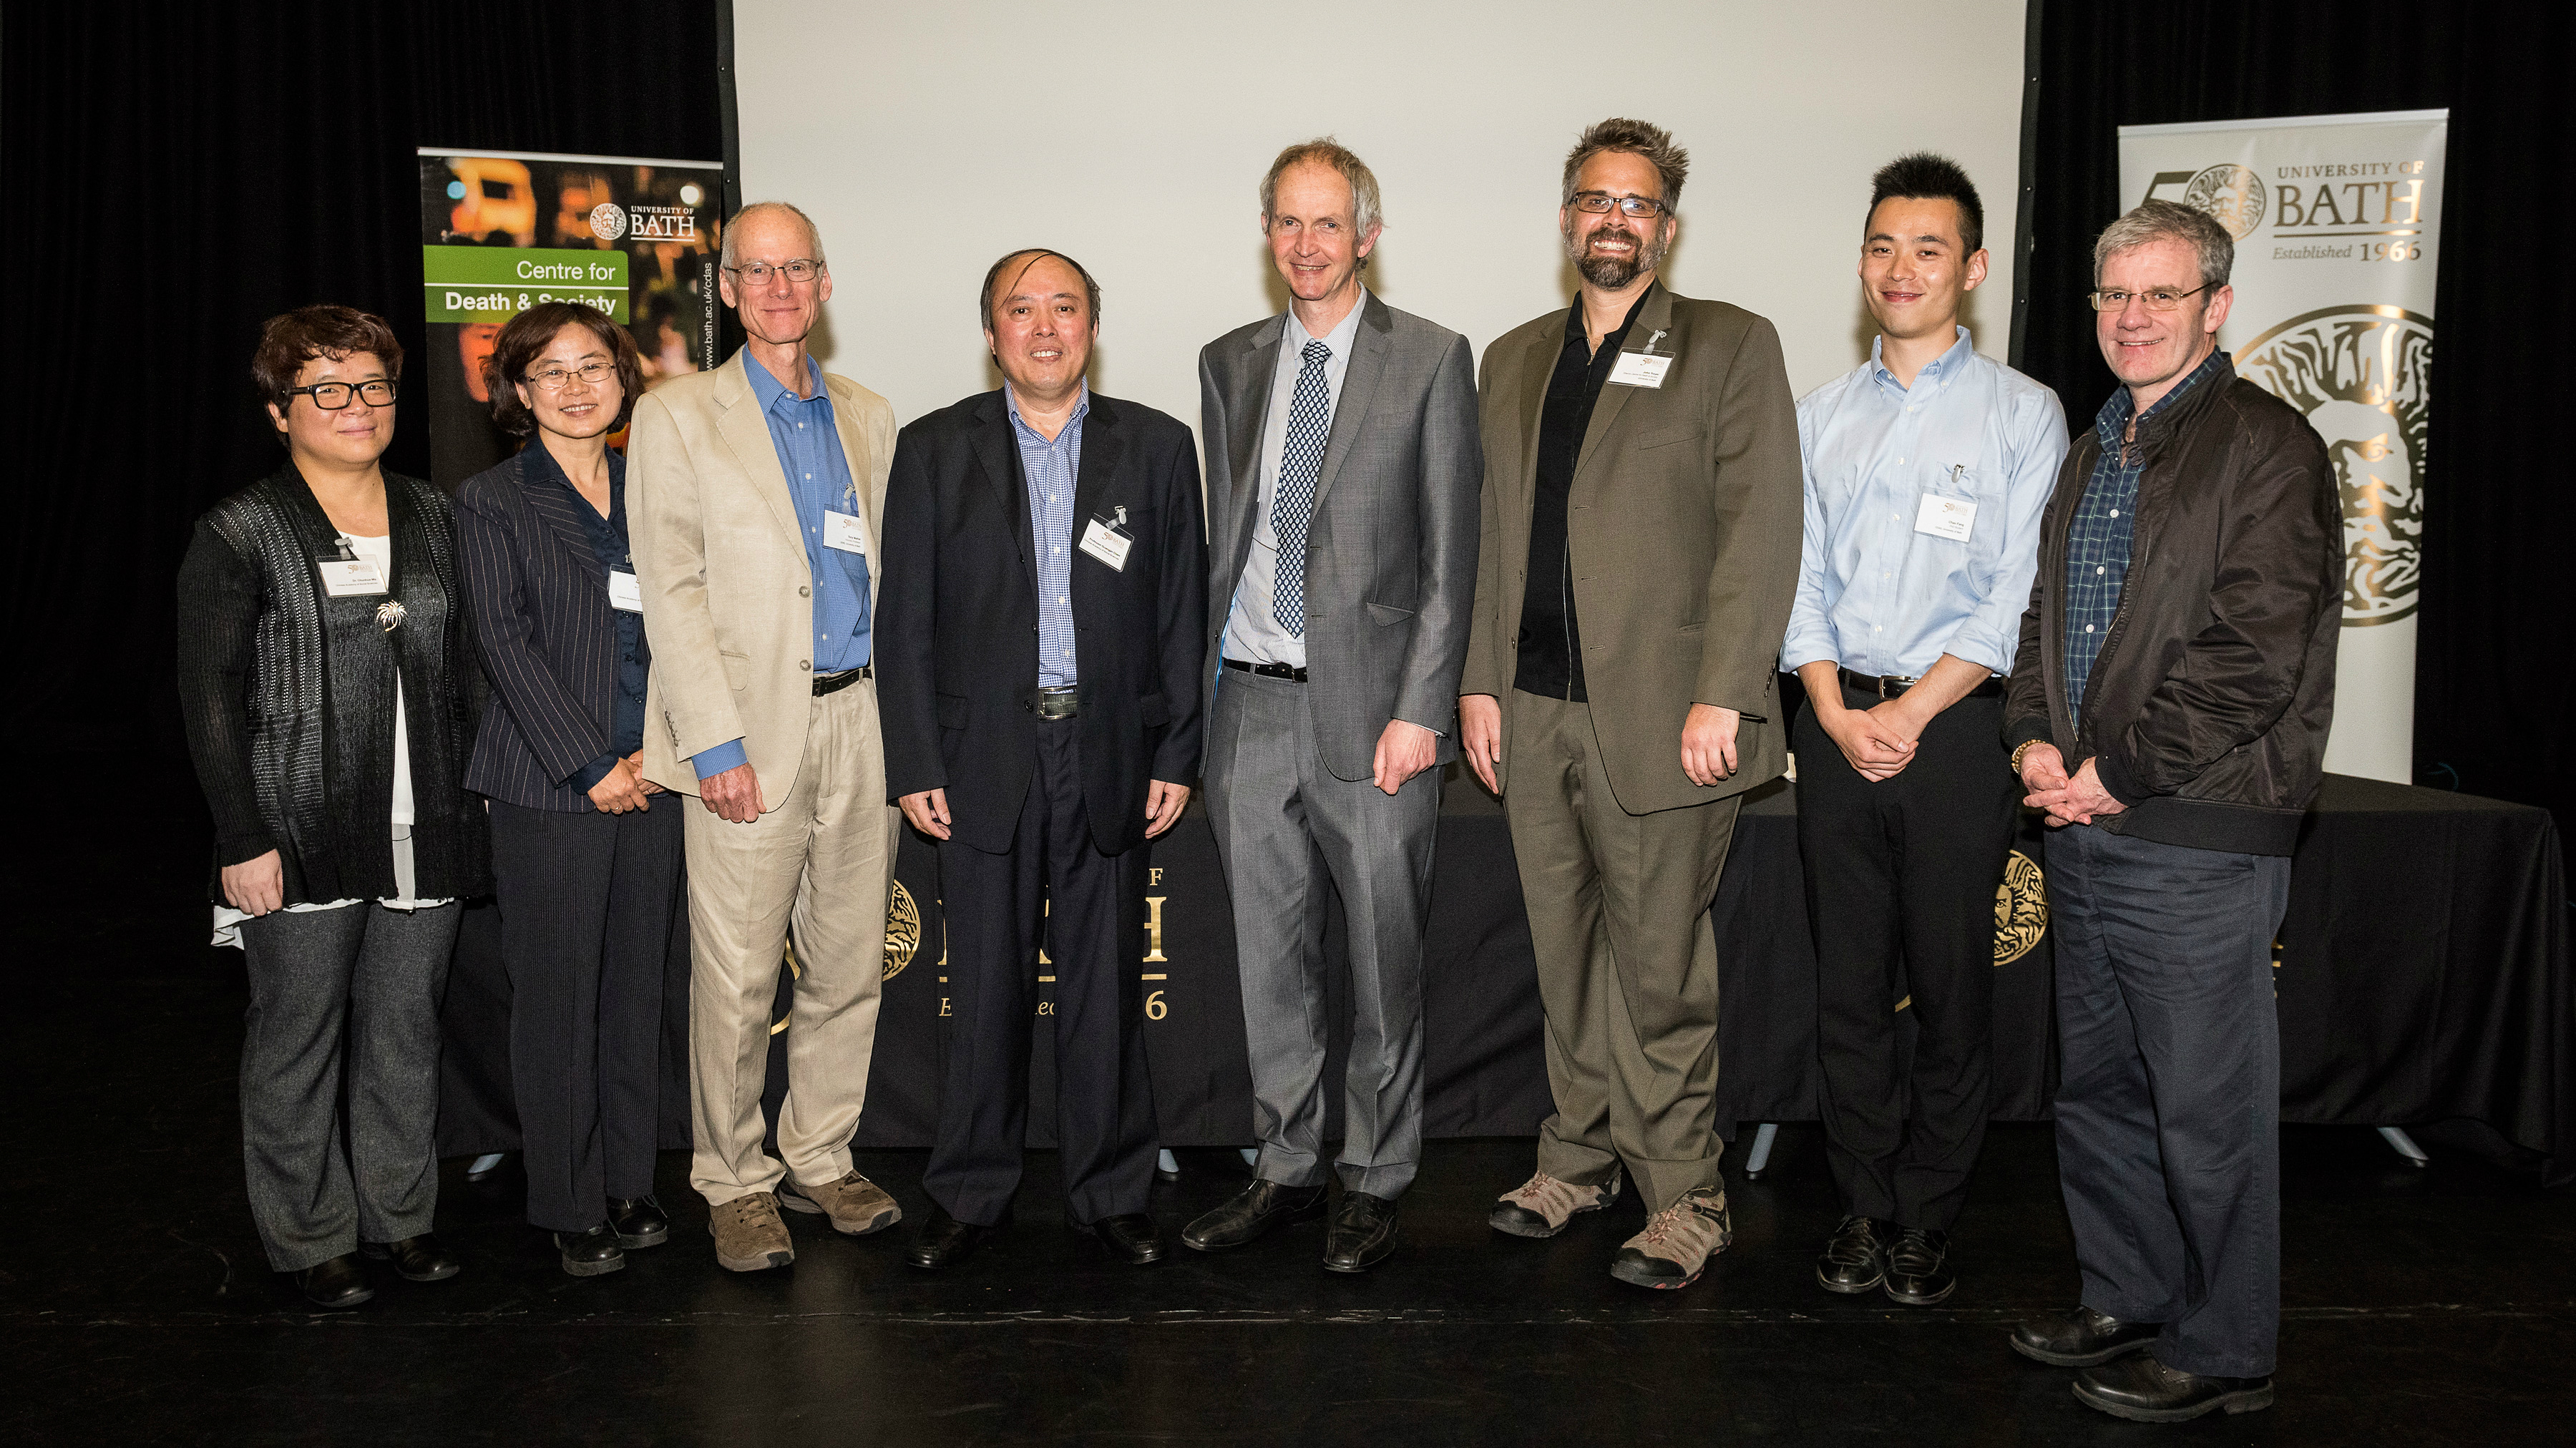 A group of 8 members of the University of Bath and the Chinese Academy of Social Sciences